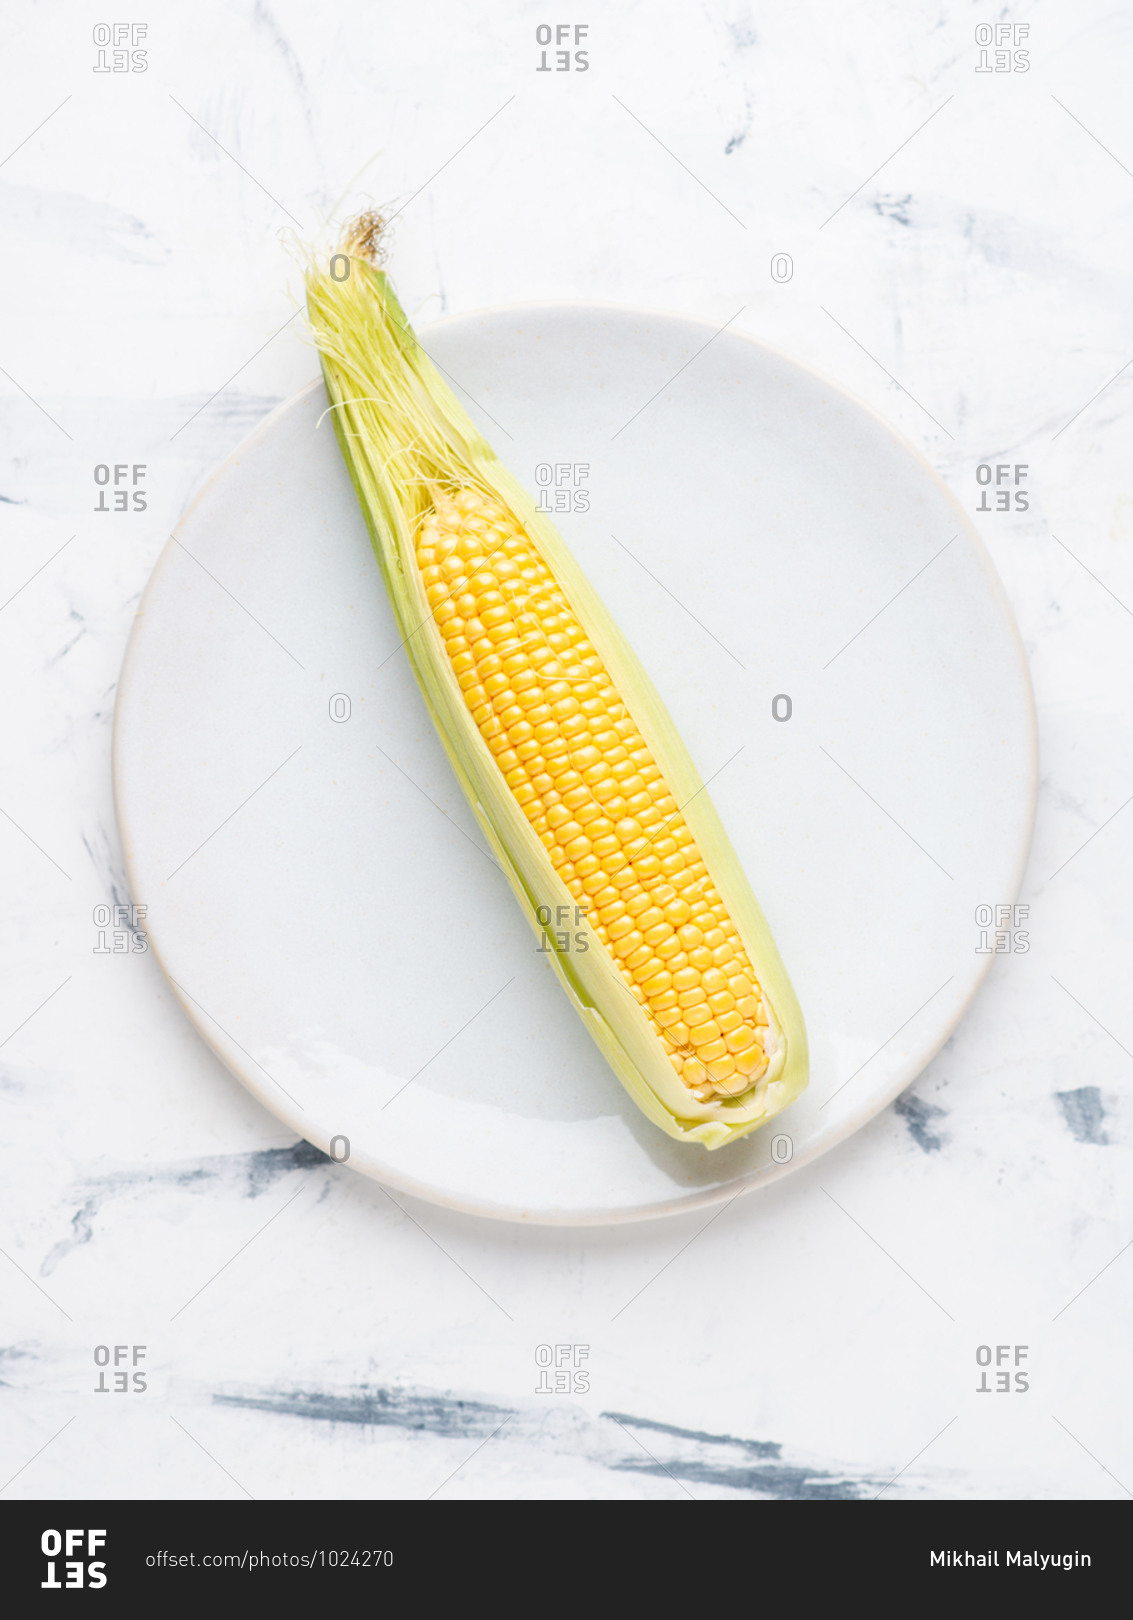 Overhead view of raw fresh yellow corn on the cob served on plate over white background